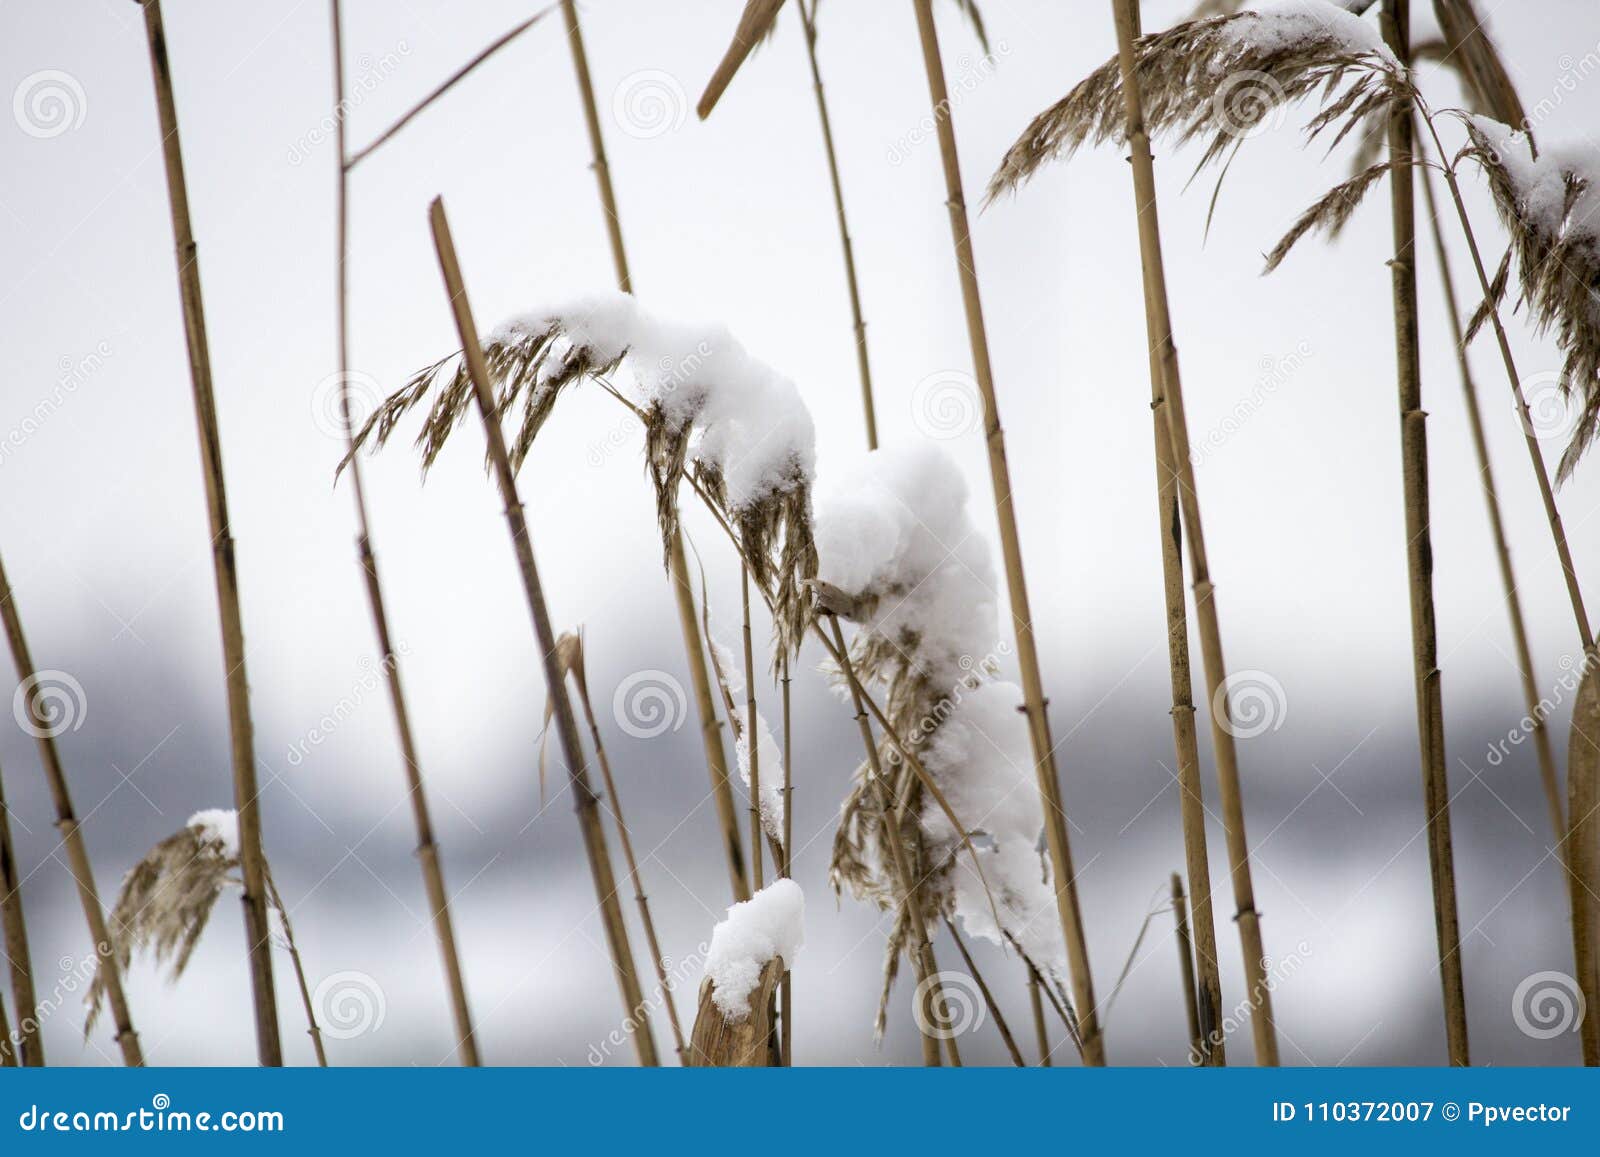 Reed in snow stock image. Image of idyllic, forest, light - 110372007